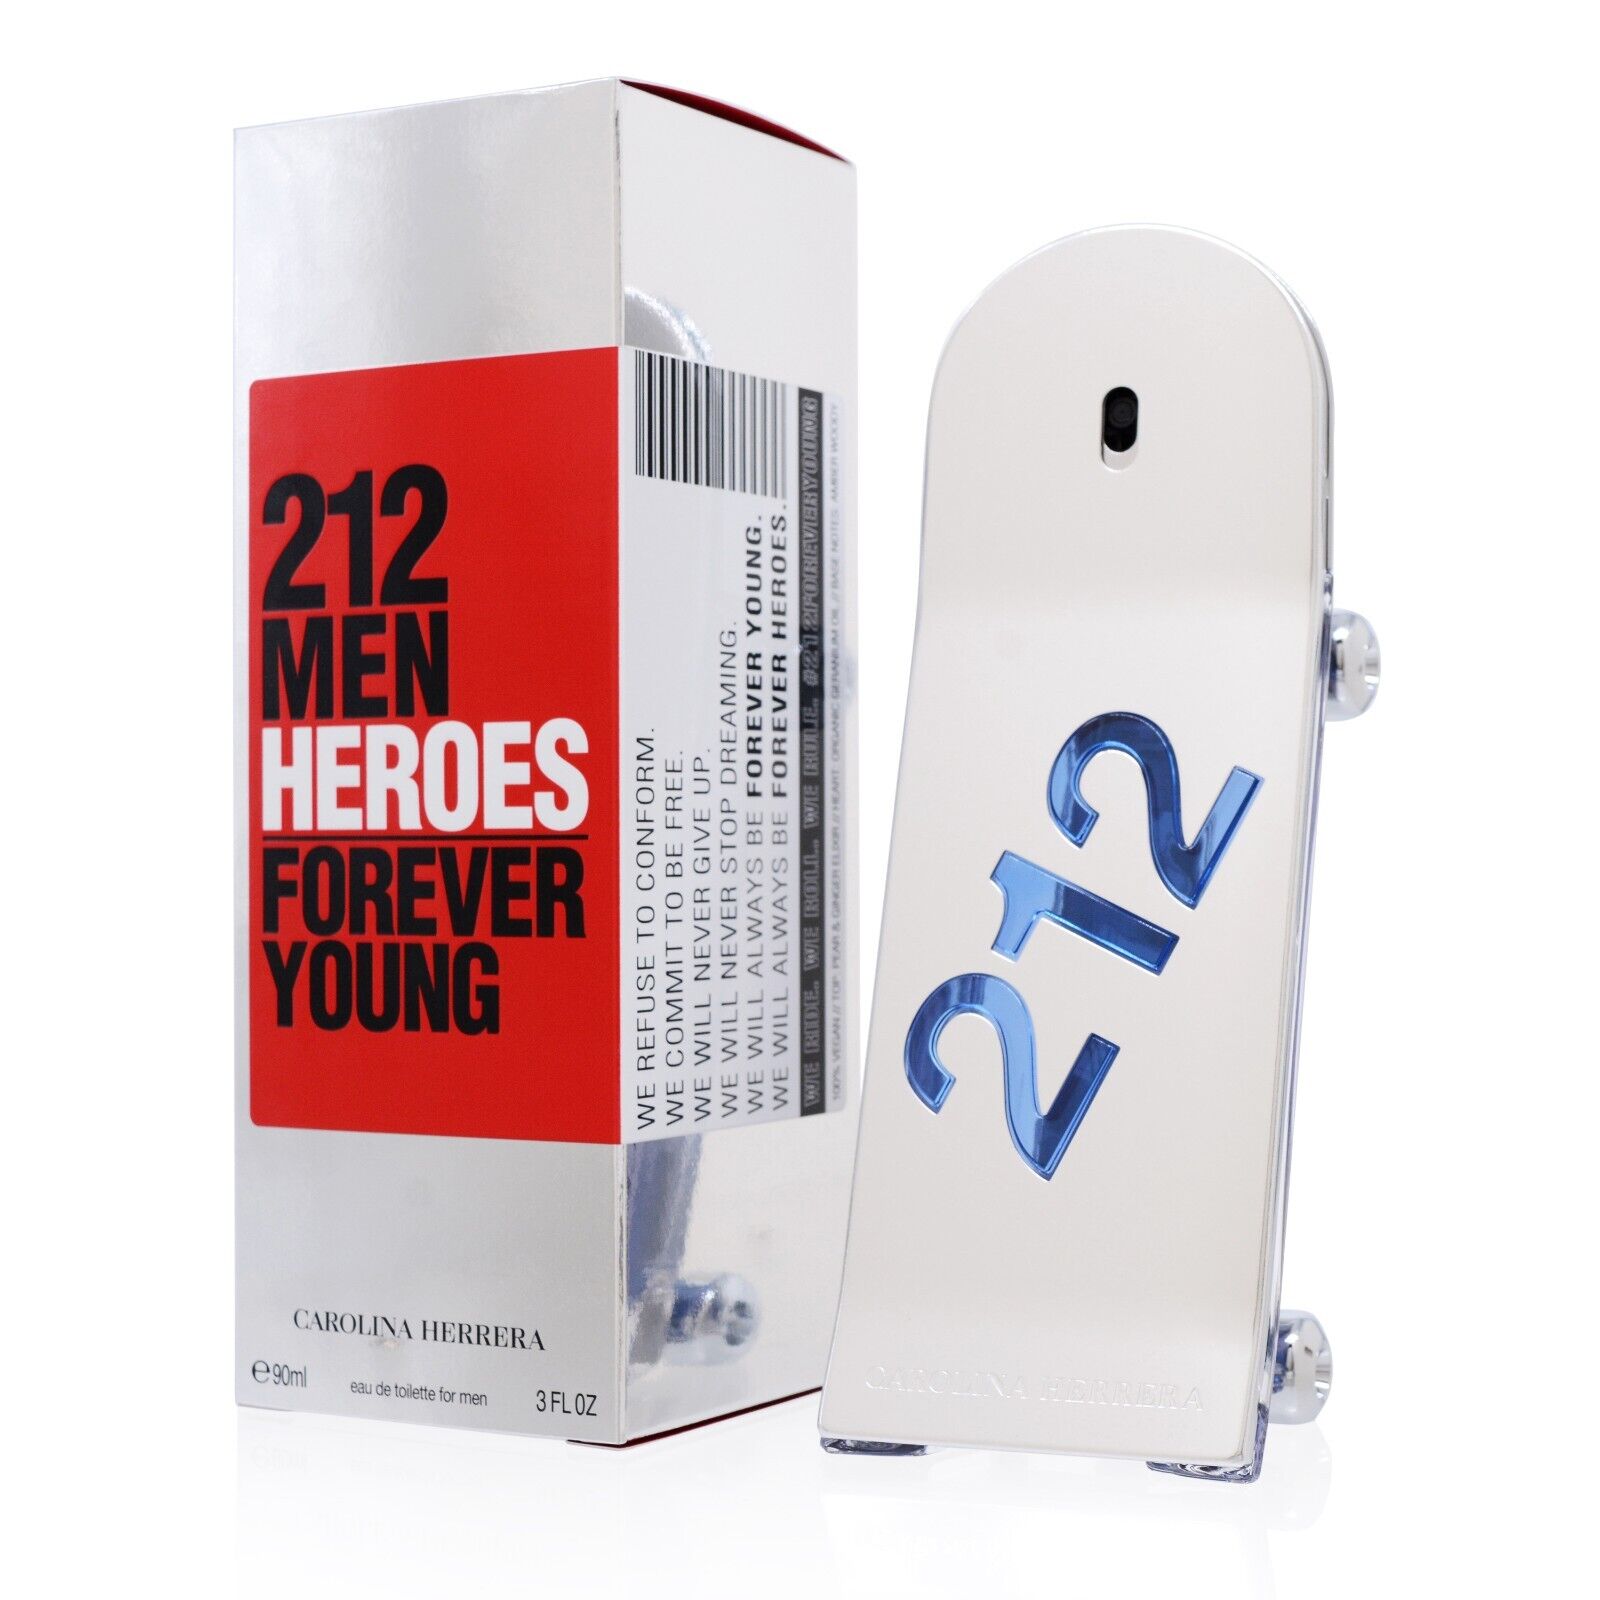 212 Heroes Forever Young Eau de Toilette Spray for Men by Carolina Herrera, Product image 1